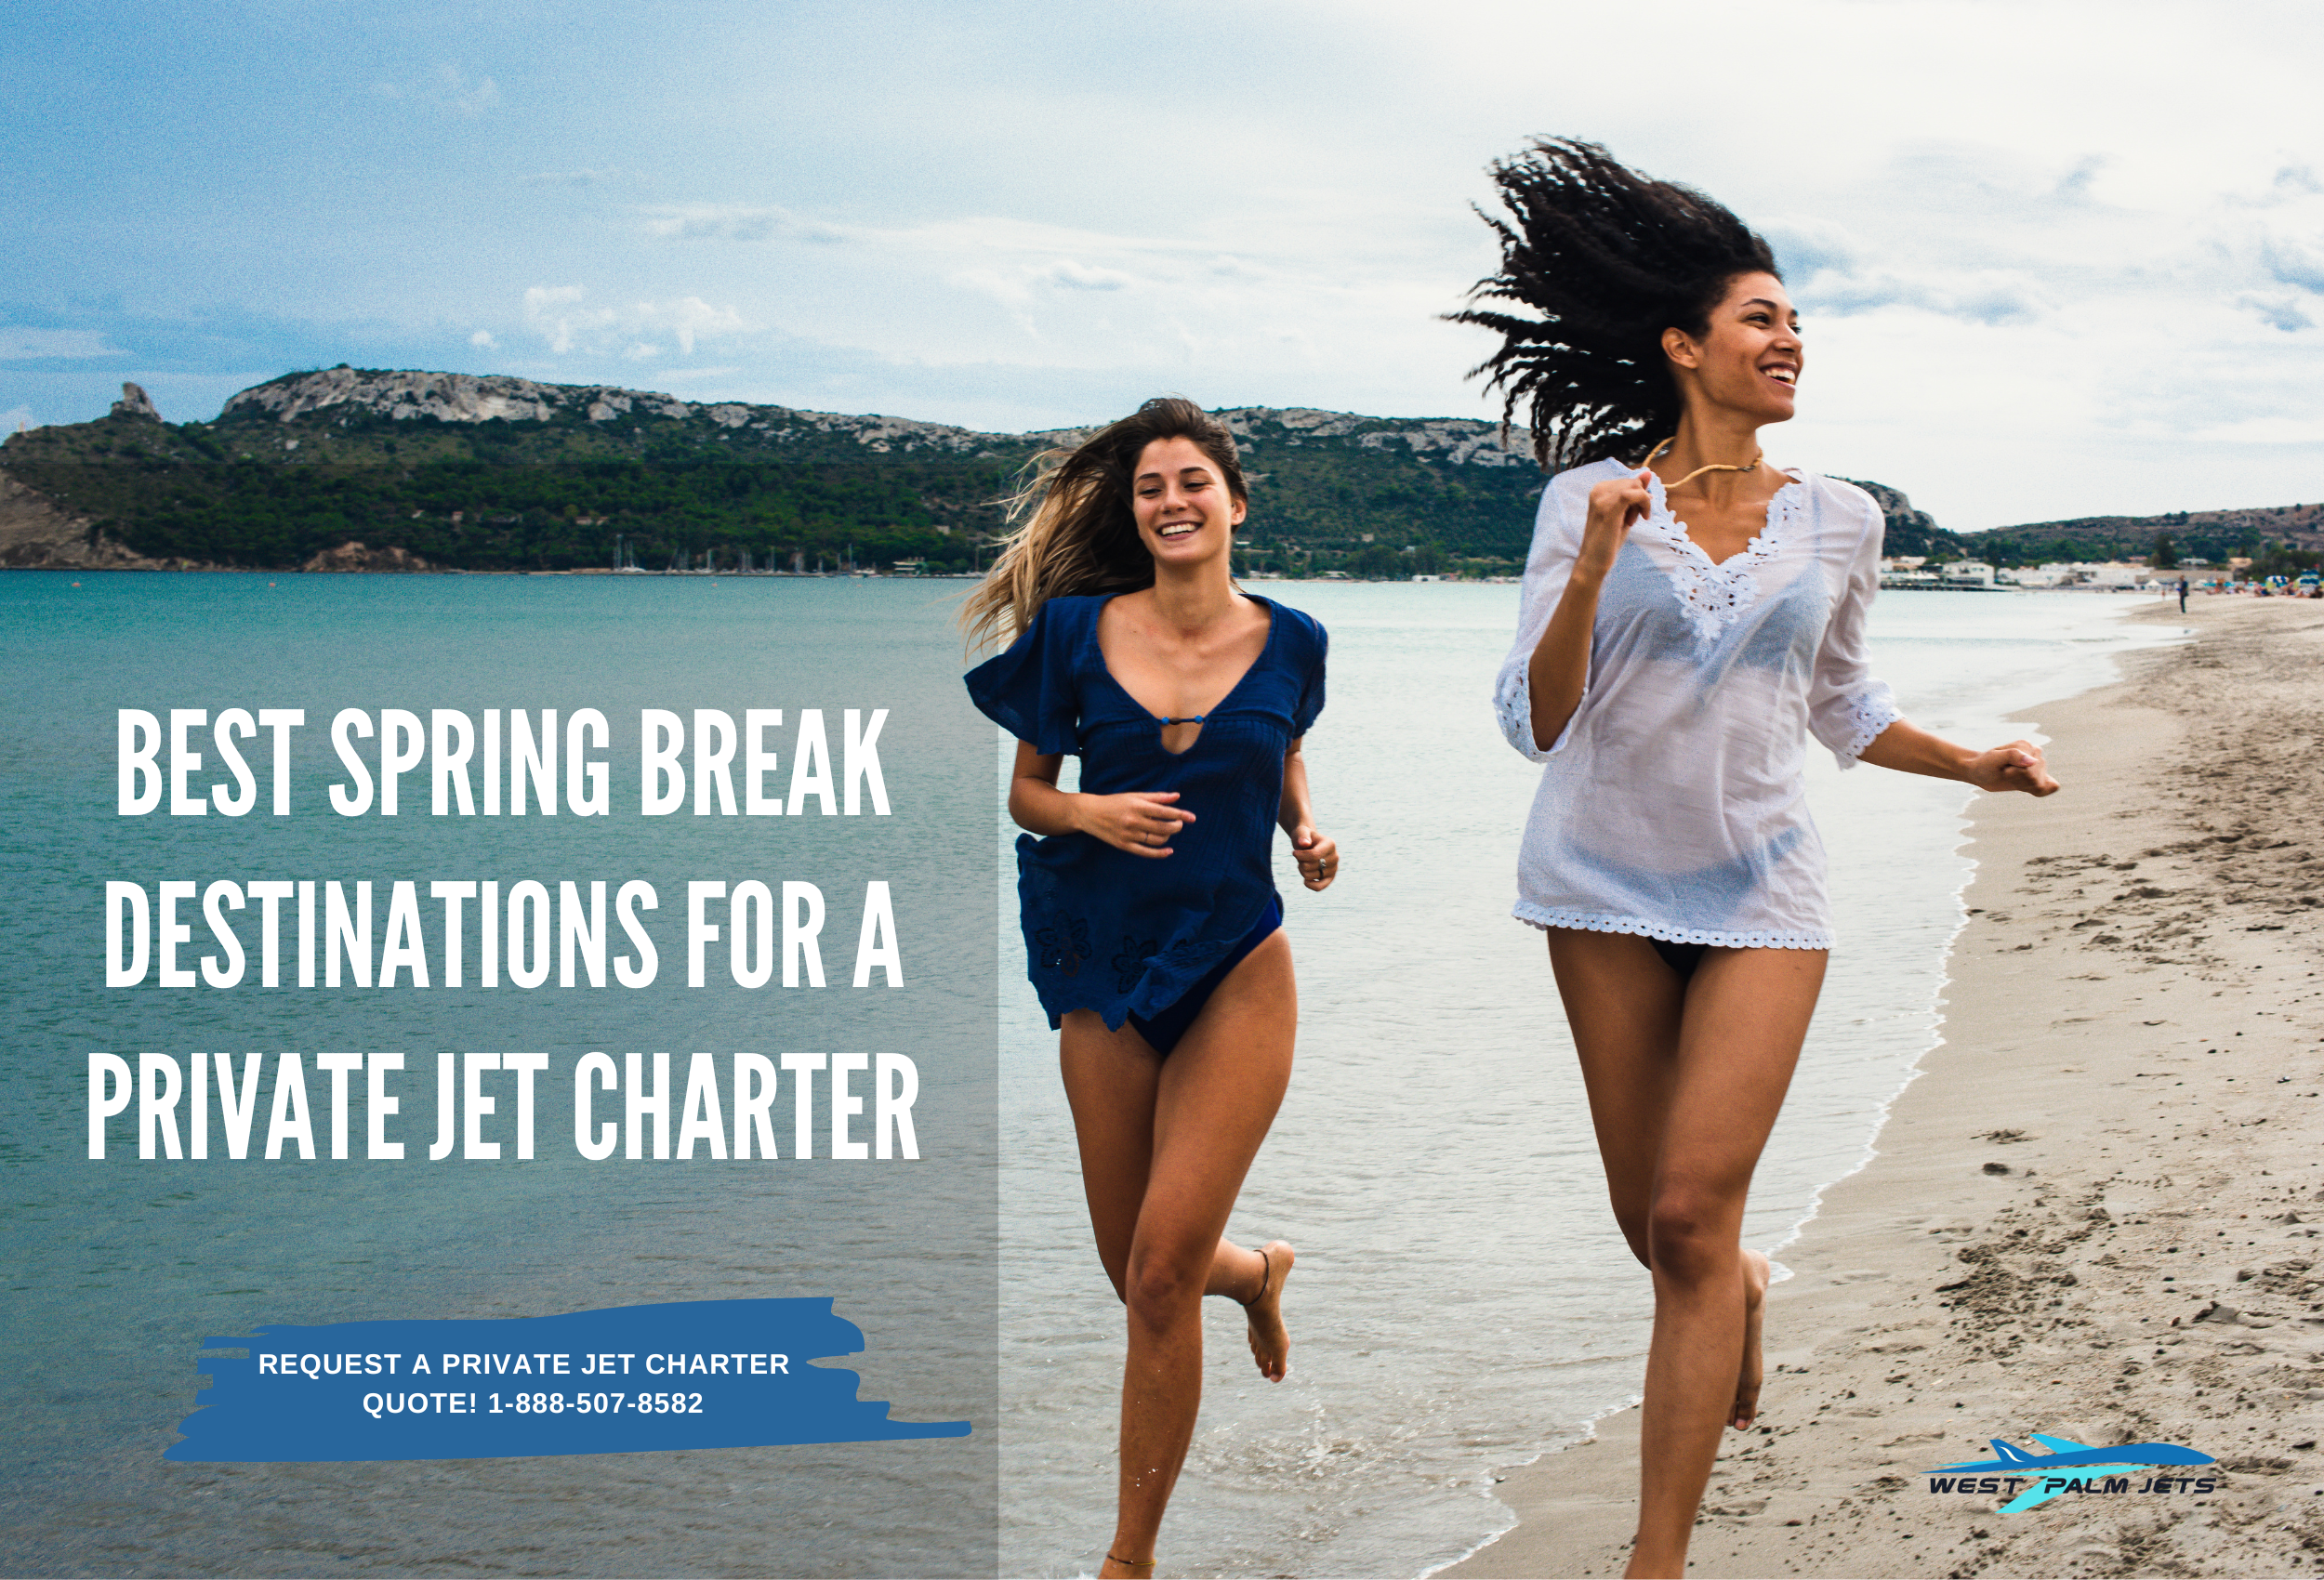 Best Spring Break Destinations for a Private Jet Charter